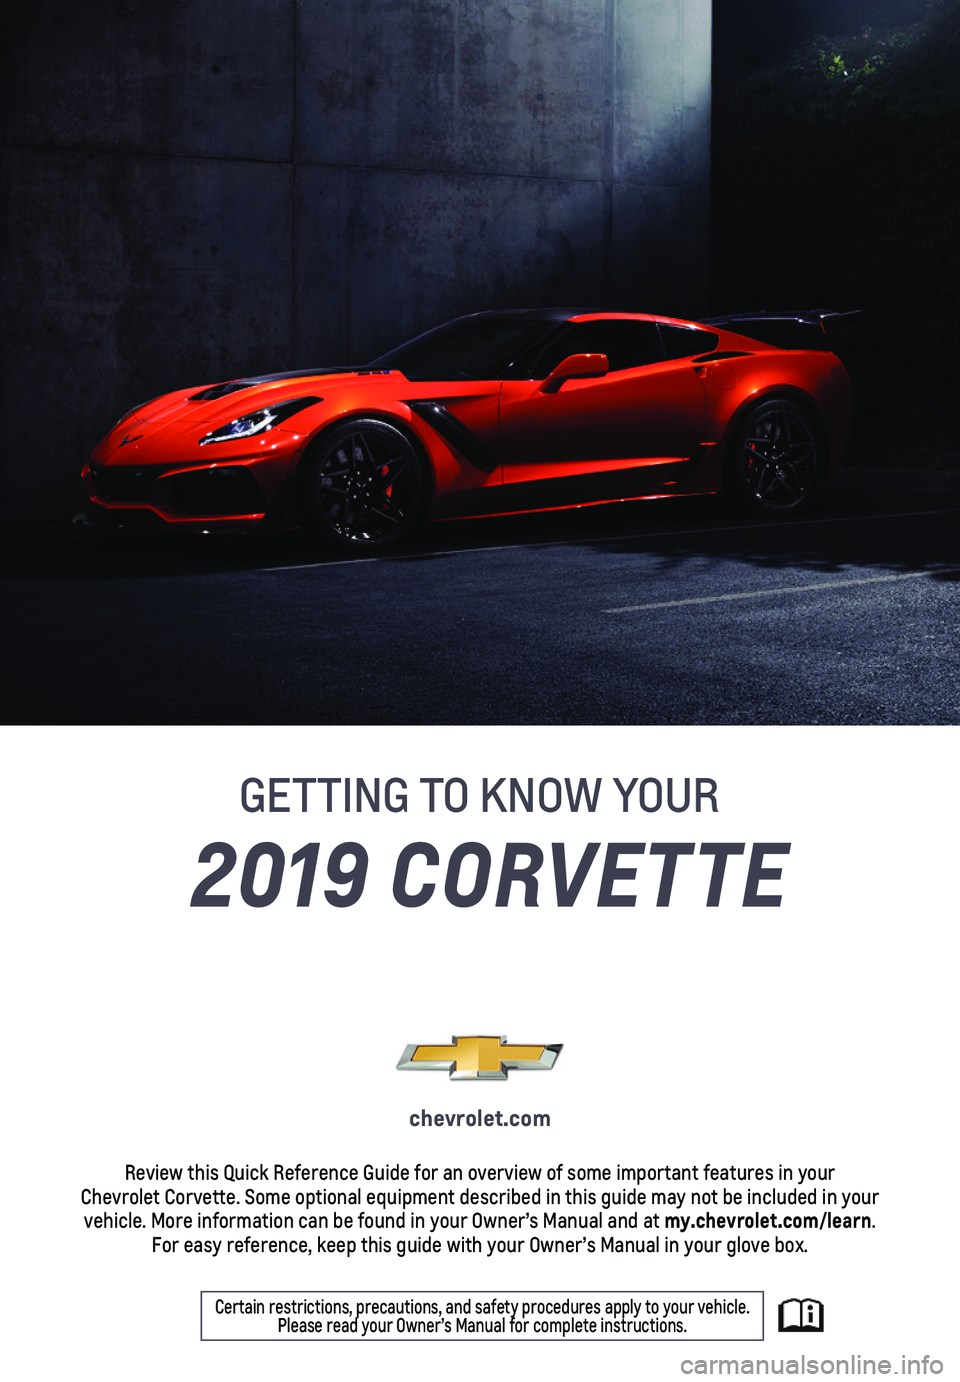 CHEVROLET CORVETTE 2019  Get To Know Guide 2019 CORVETTE
GETTING TO KNOW YOUR
chevrolet.com
Review this Quick Reference Guide for an overview of some important feat\
ures in your  Chevrolet Corvette. Some optional equipment described in this g